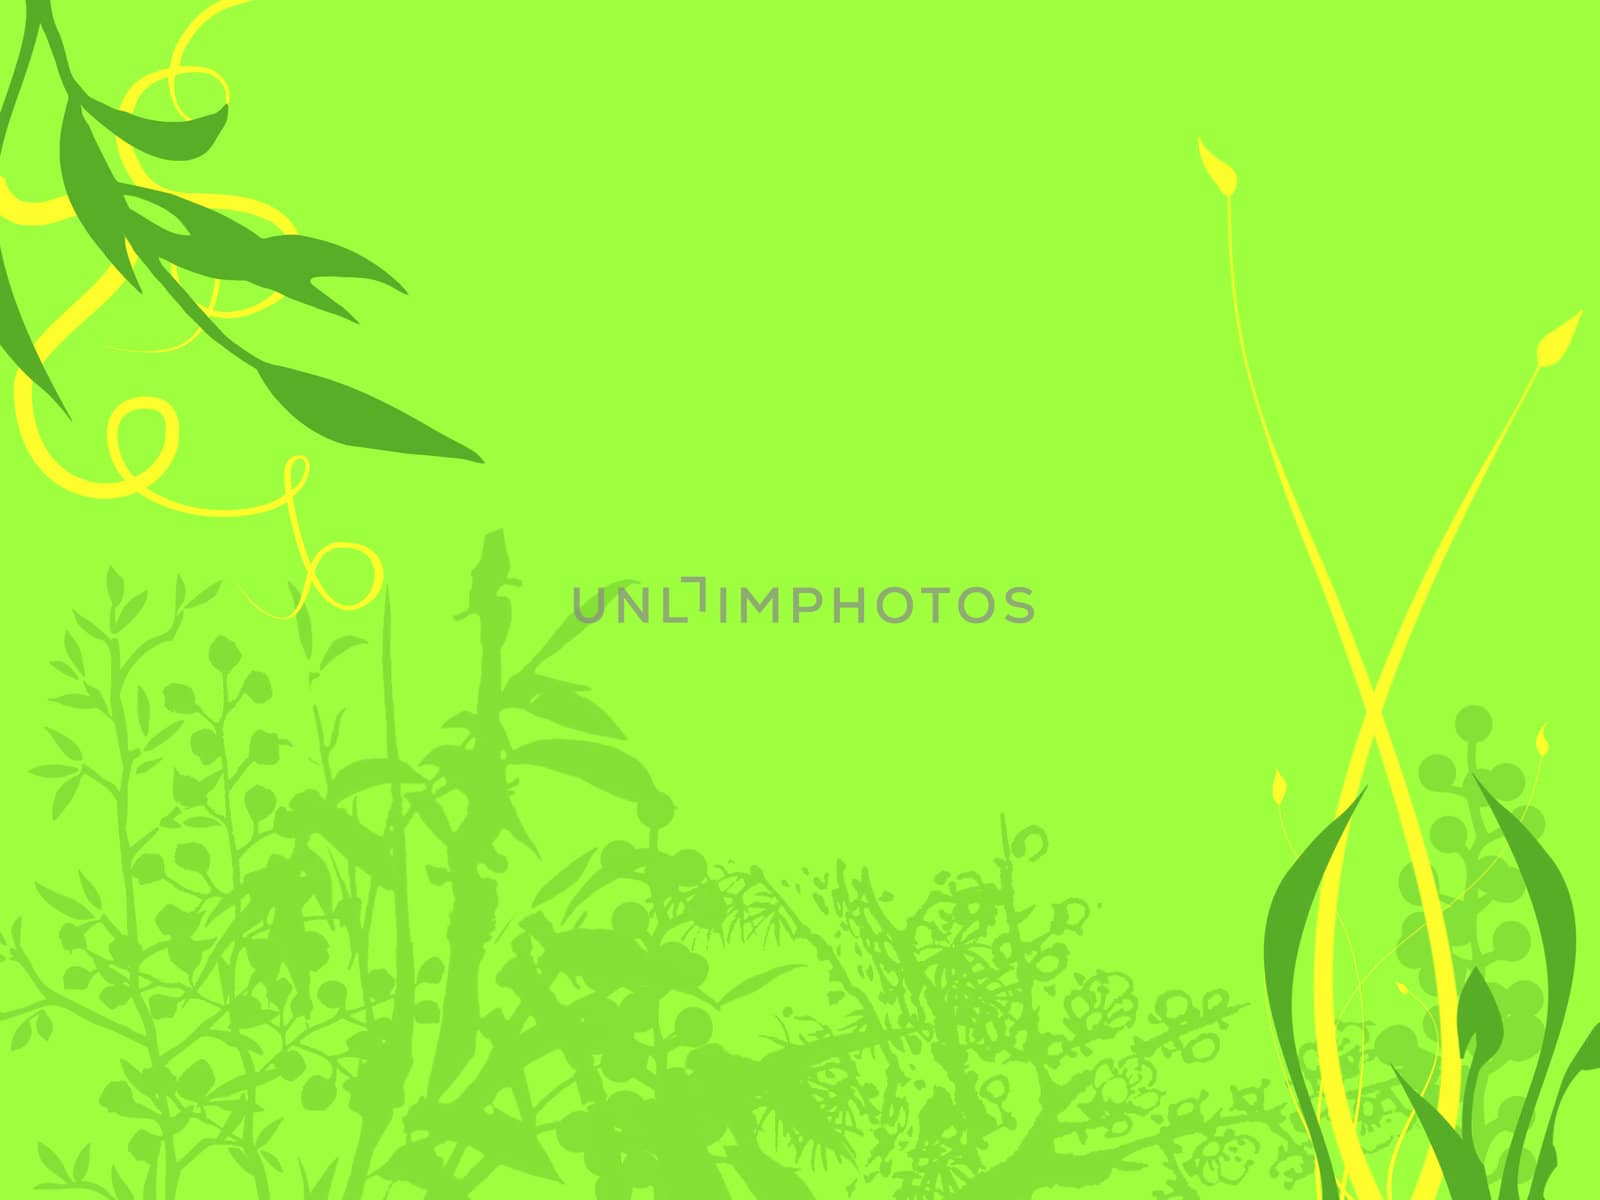 Flowers and Leaves Framing a Light Green Background by bobbigmac